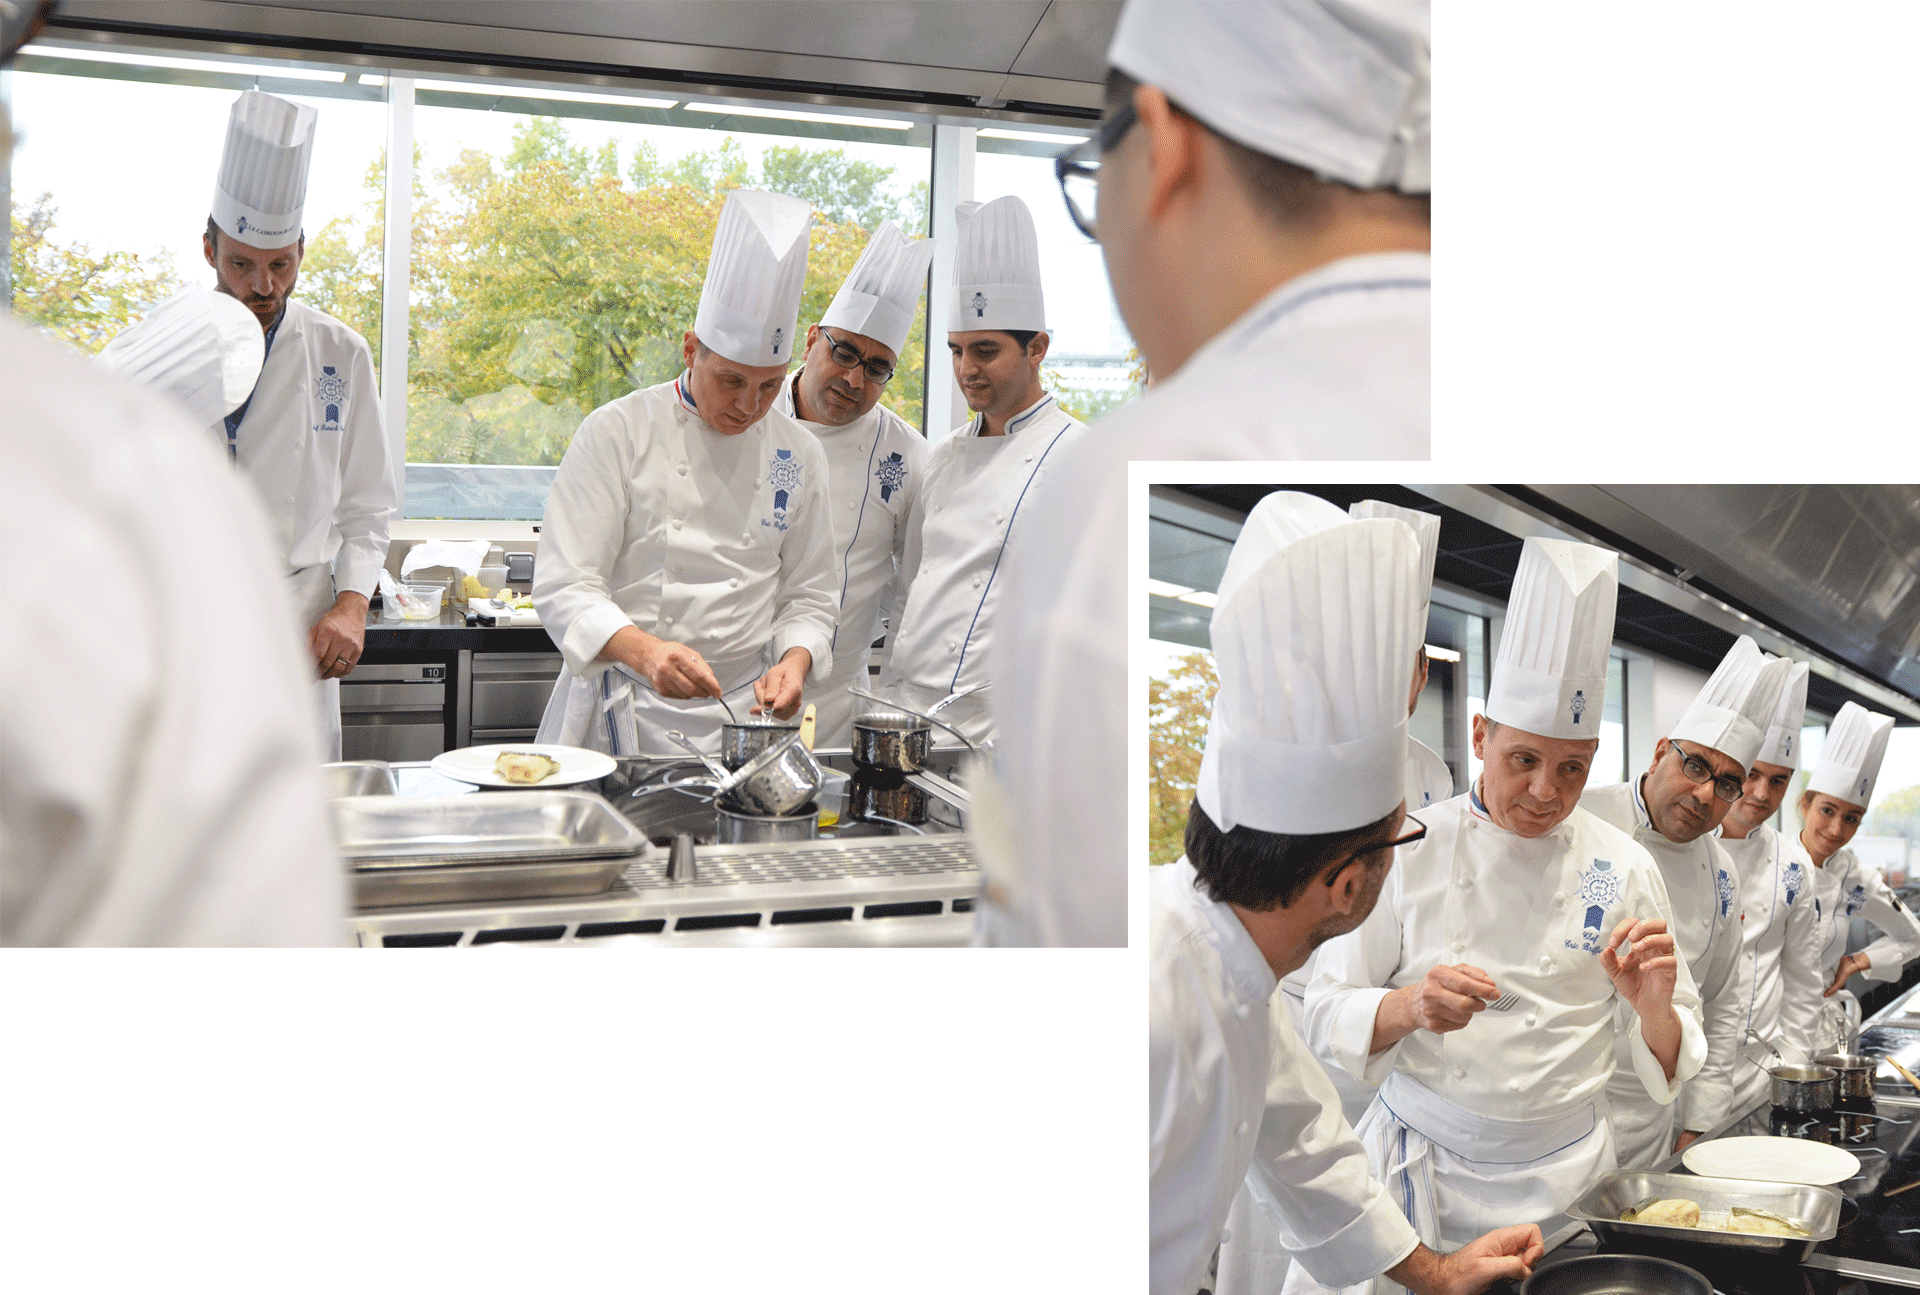 Introduction to new culinary arts techniques with Chef Briffard